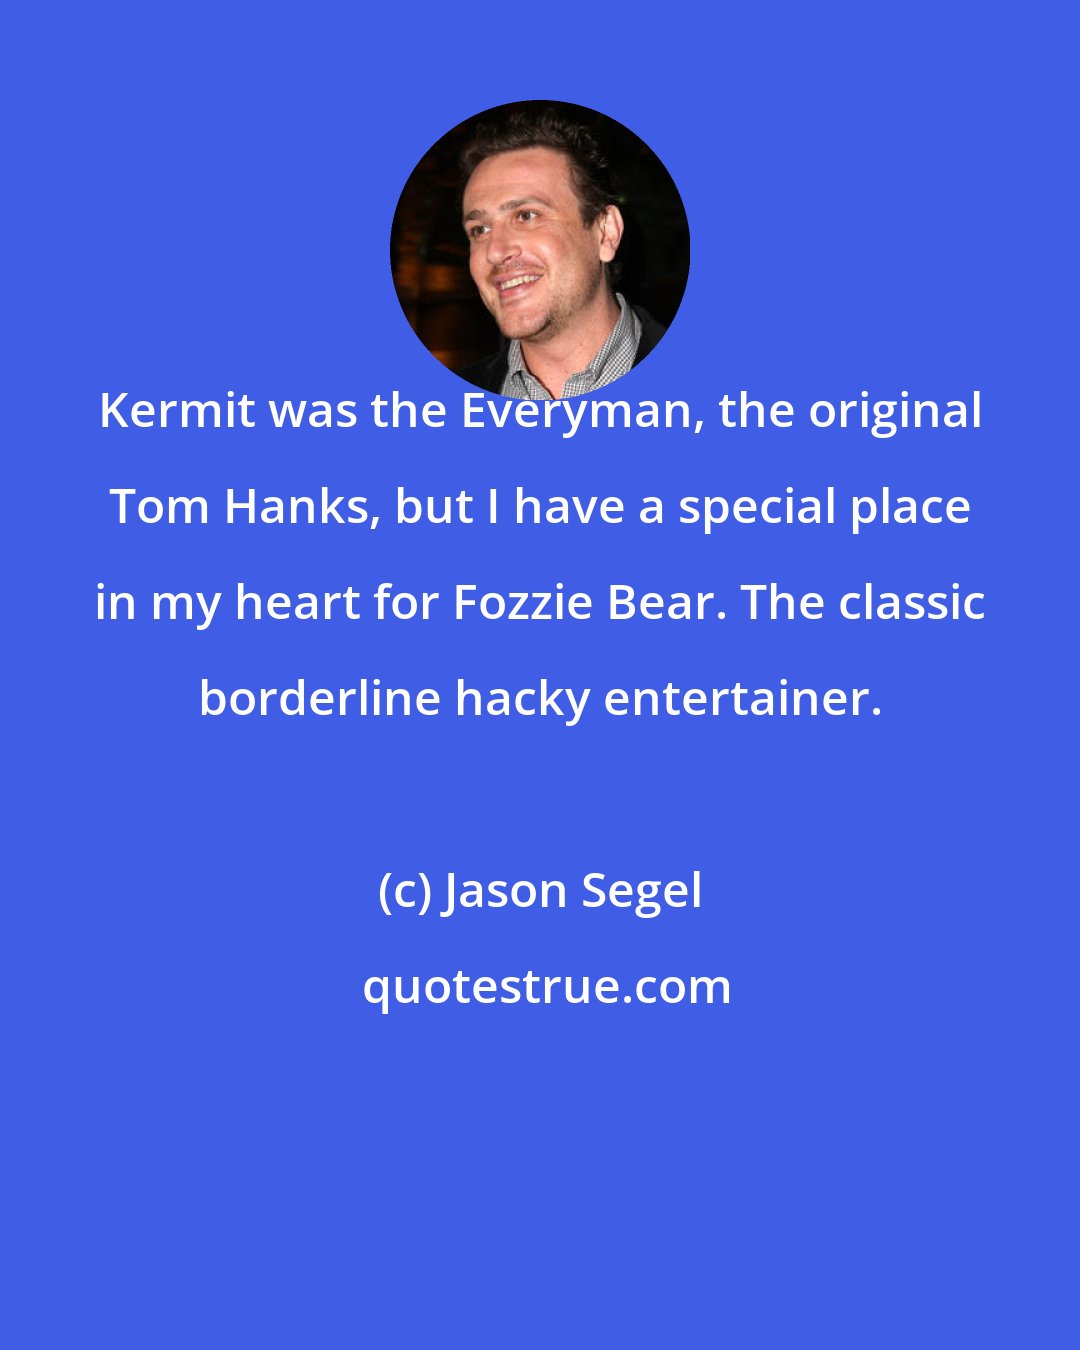 Jason Segel: Kermit was the Everyman, the original Tom Hanks, but I have a special place in my heart for Fozzie Bear. The classic borderline hacky entertainer.